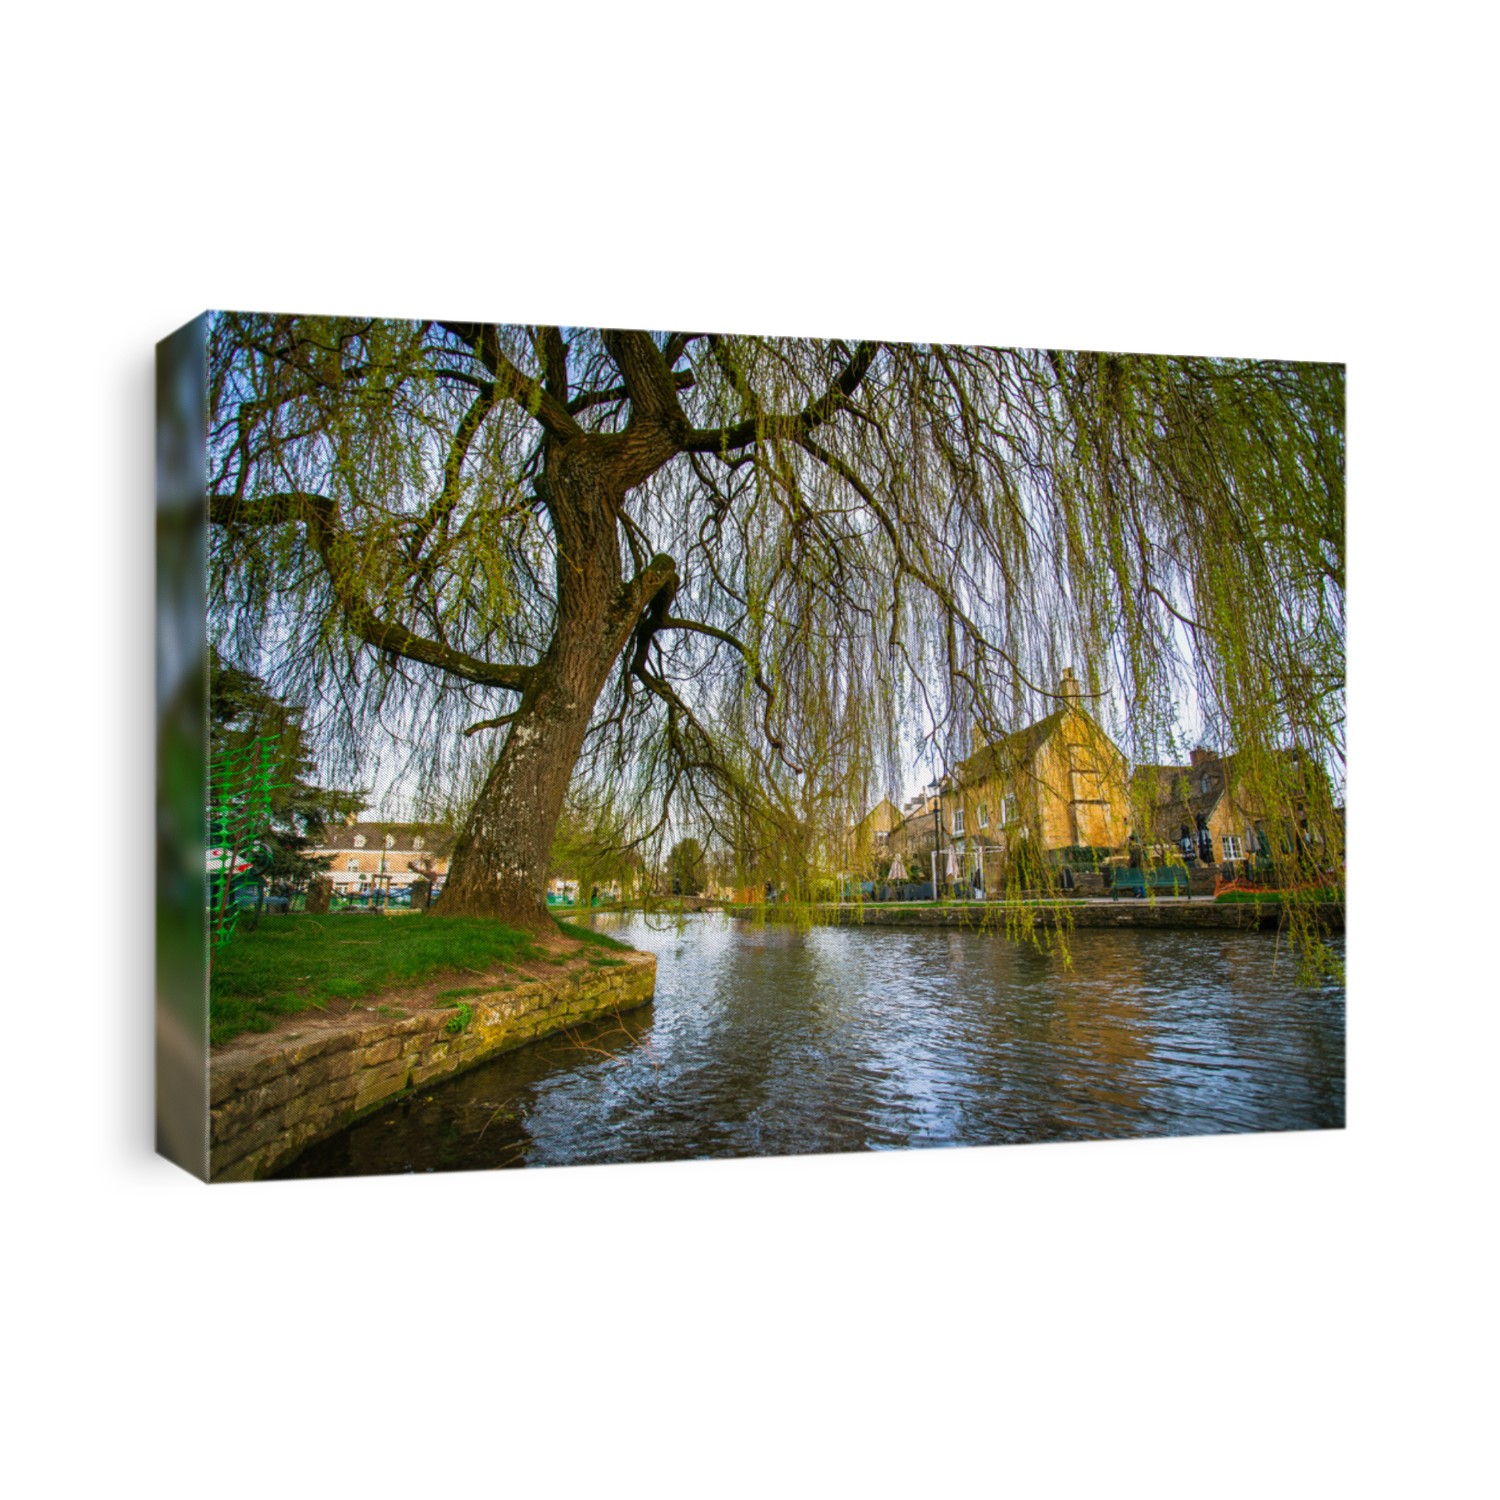 Bourton on the Water, a village and civil parish in Gloucestershire lies on a wide flat vale within the Cotswolds Area of Outstanding Natural Beauty (AONB), England, UK